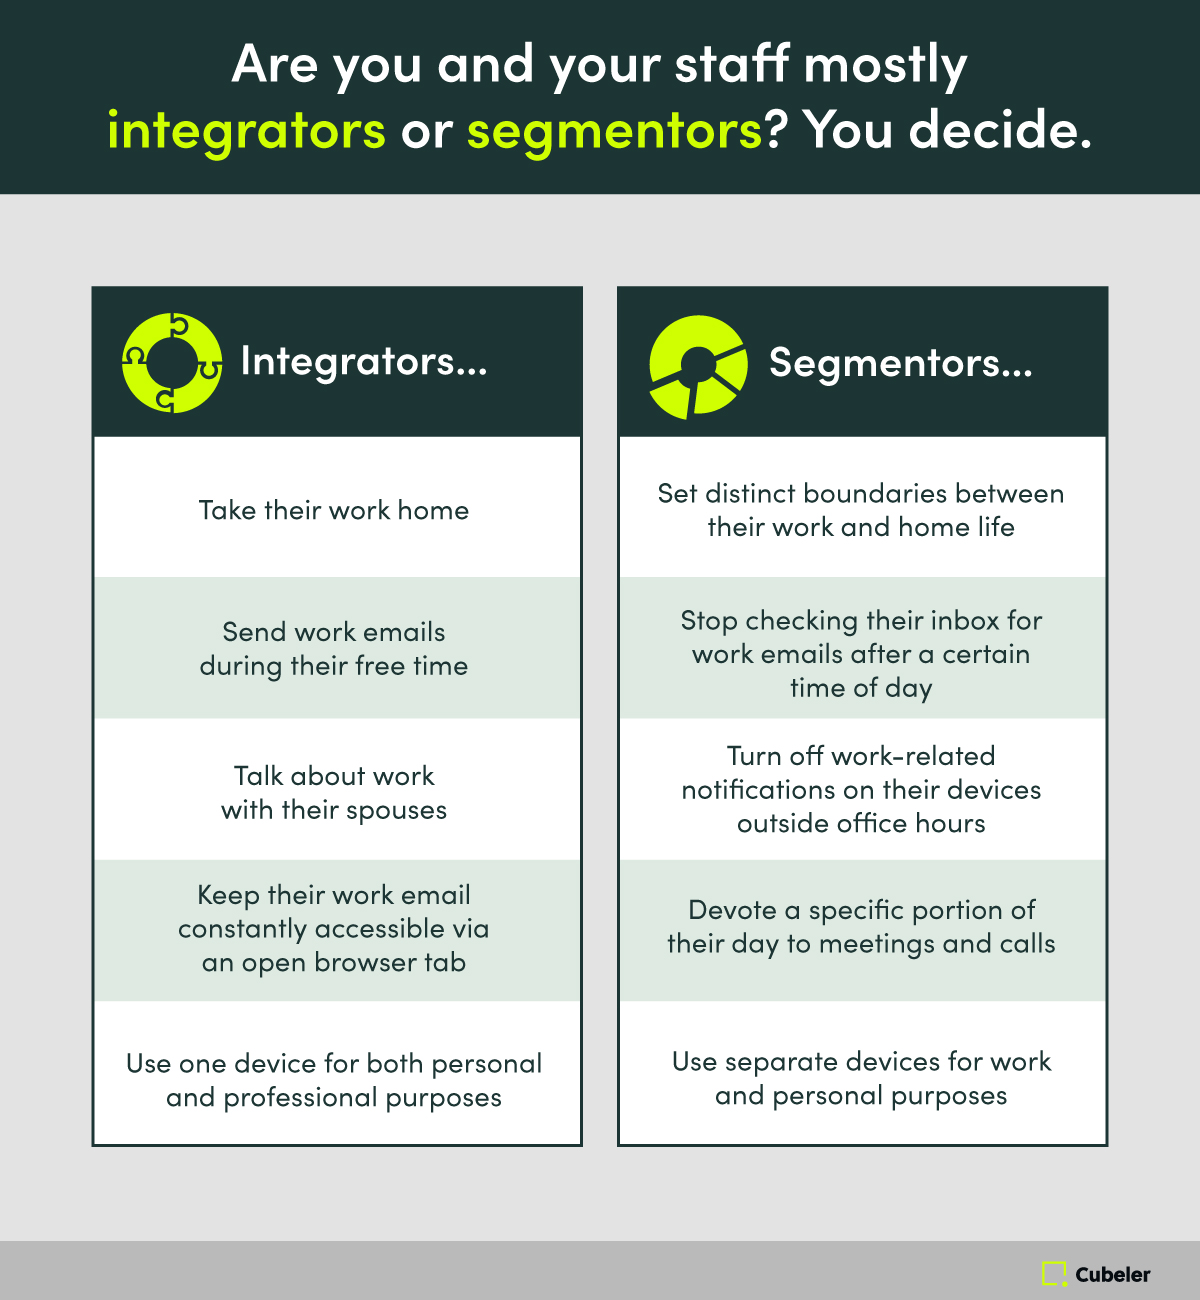 Determining if you and your staff are mostly integrators or segmentors